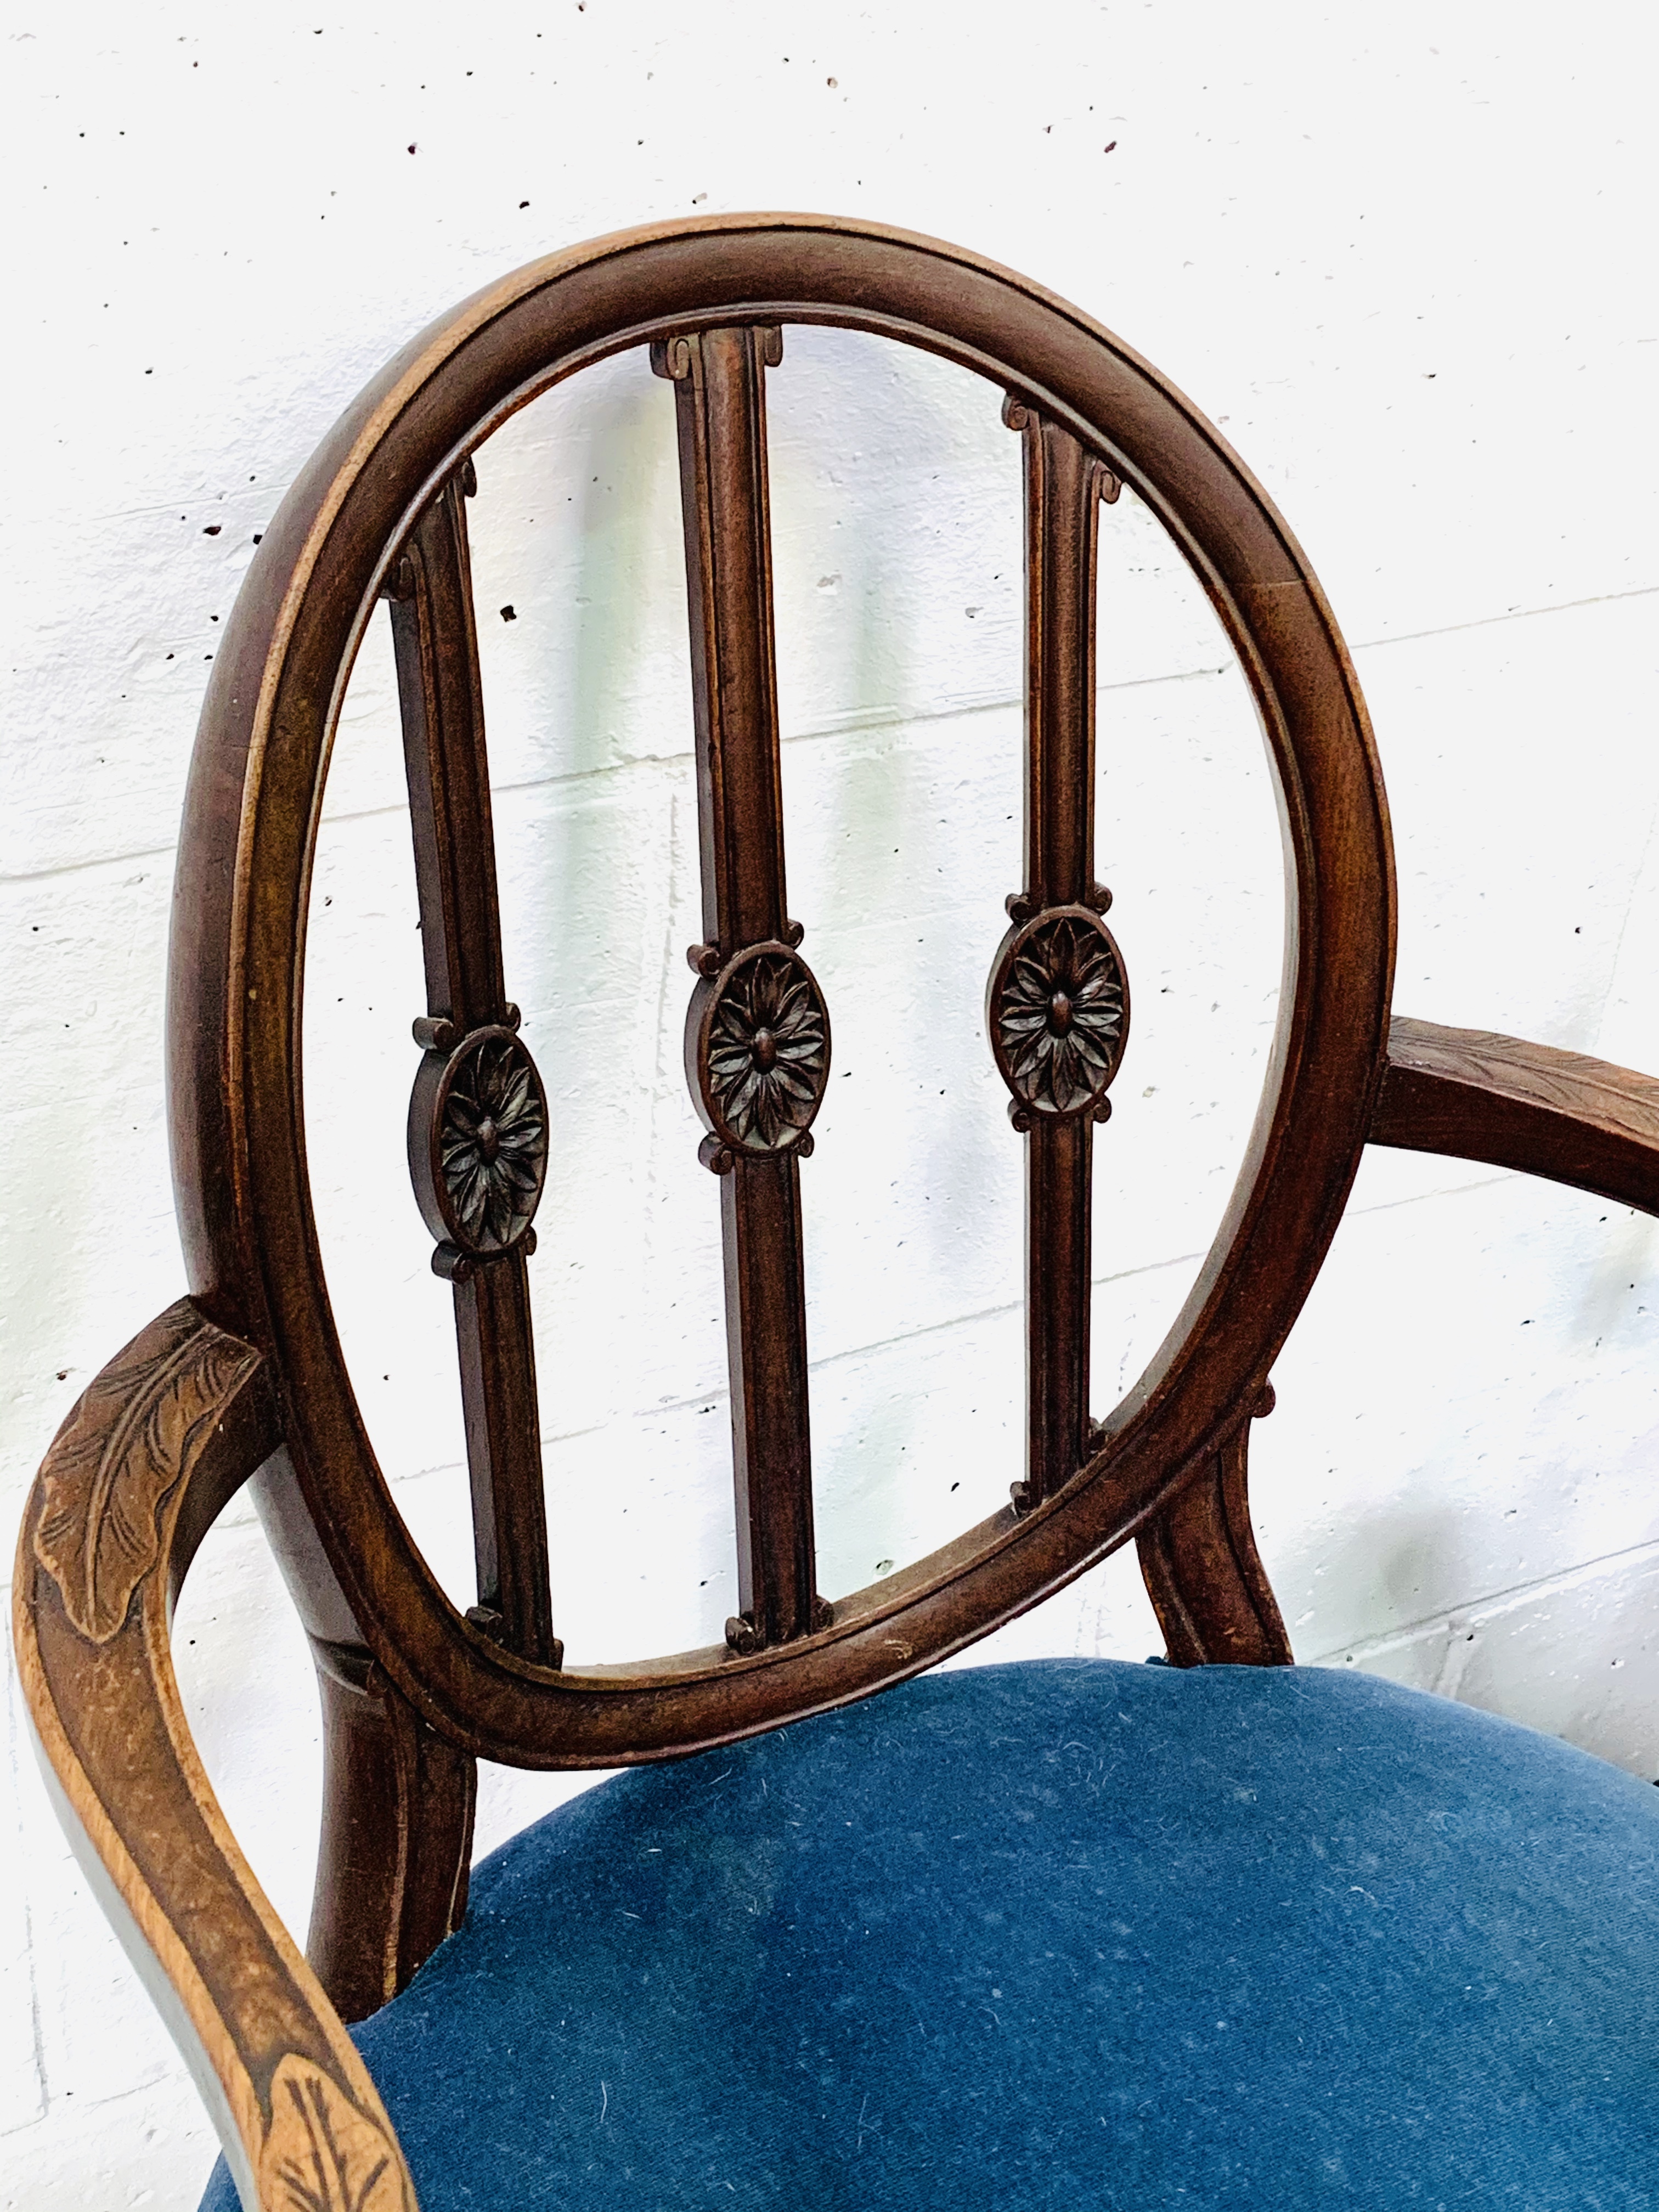 Set of eight mahogany Regency style open elbow chairs upholstered in petrol blue velvet. - Image 4 of 7